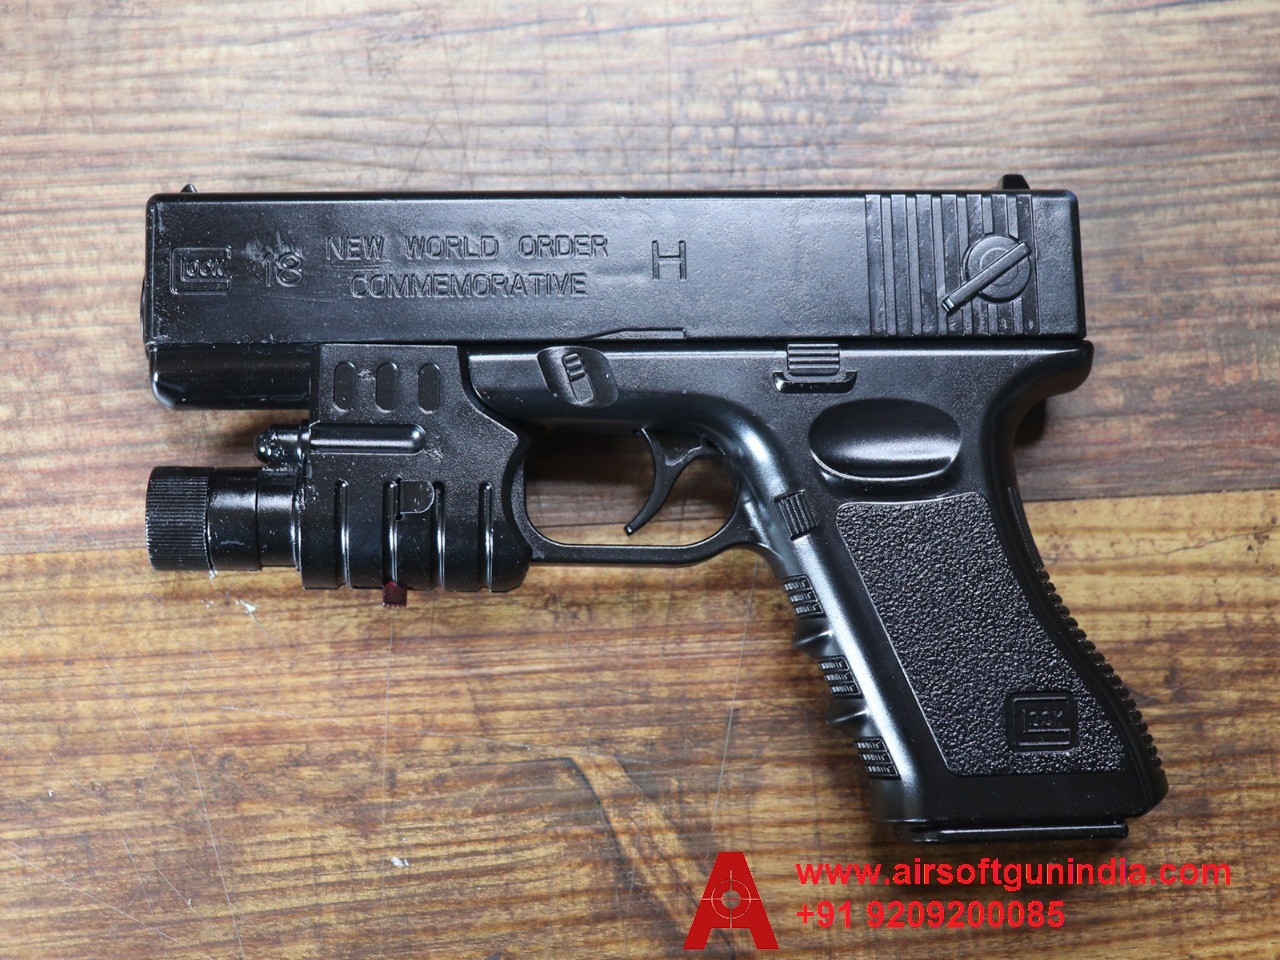 Glock 18 Spring Plastic Toy For Kids By Airsoft Gun India